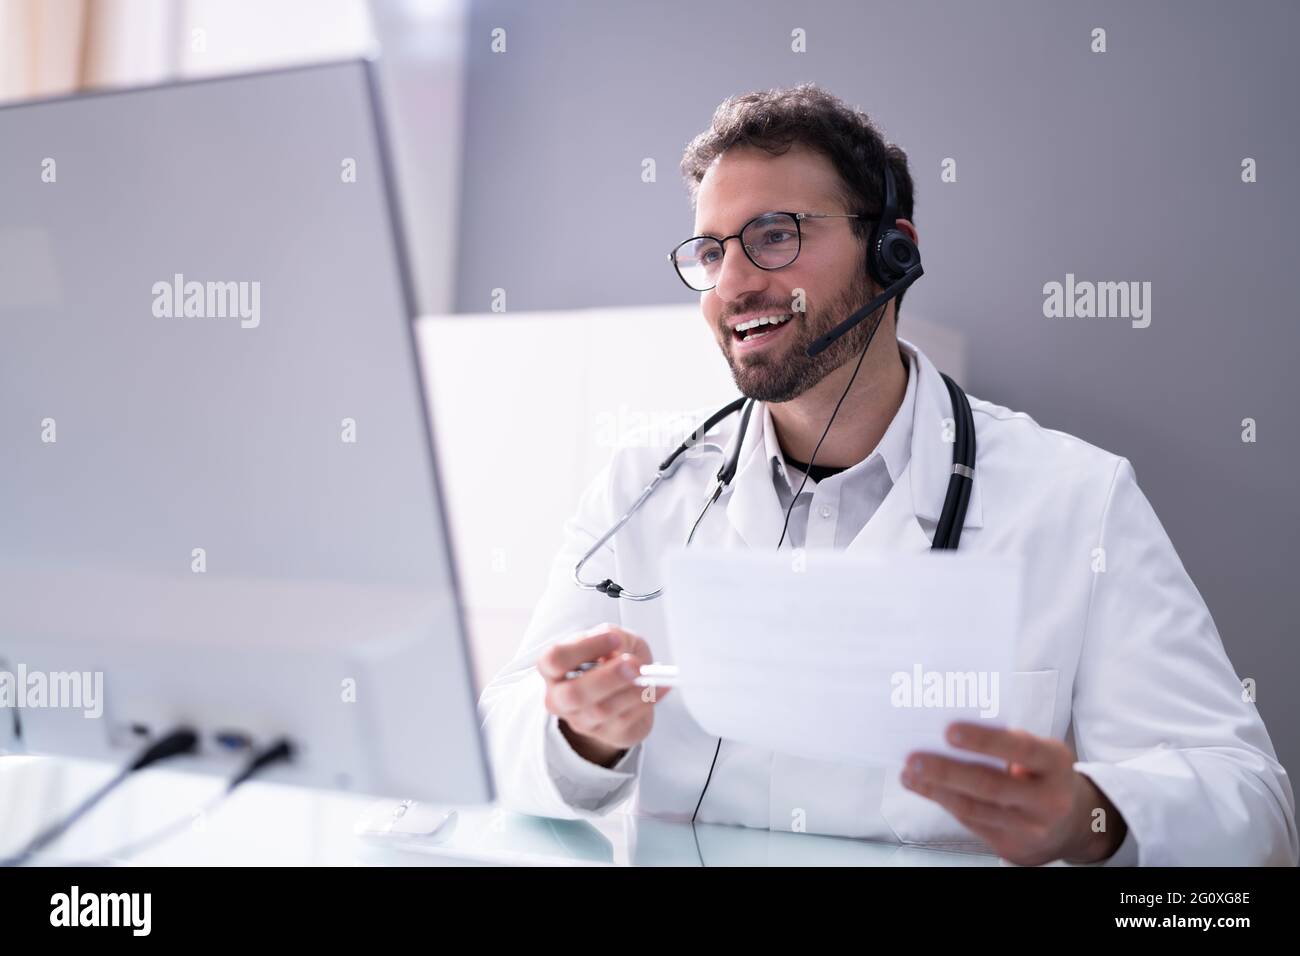 Doctor Online Consult Video Call On Computer Stock Photo